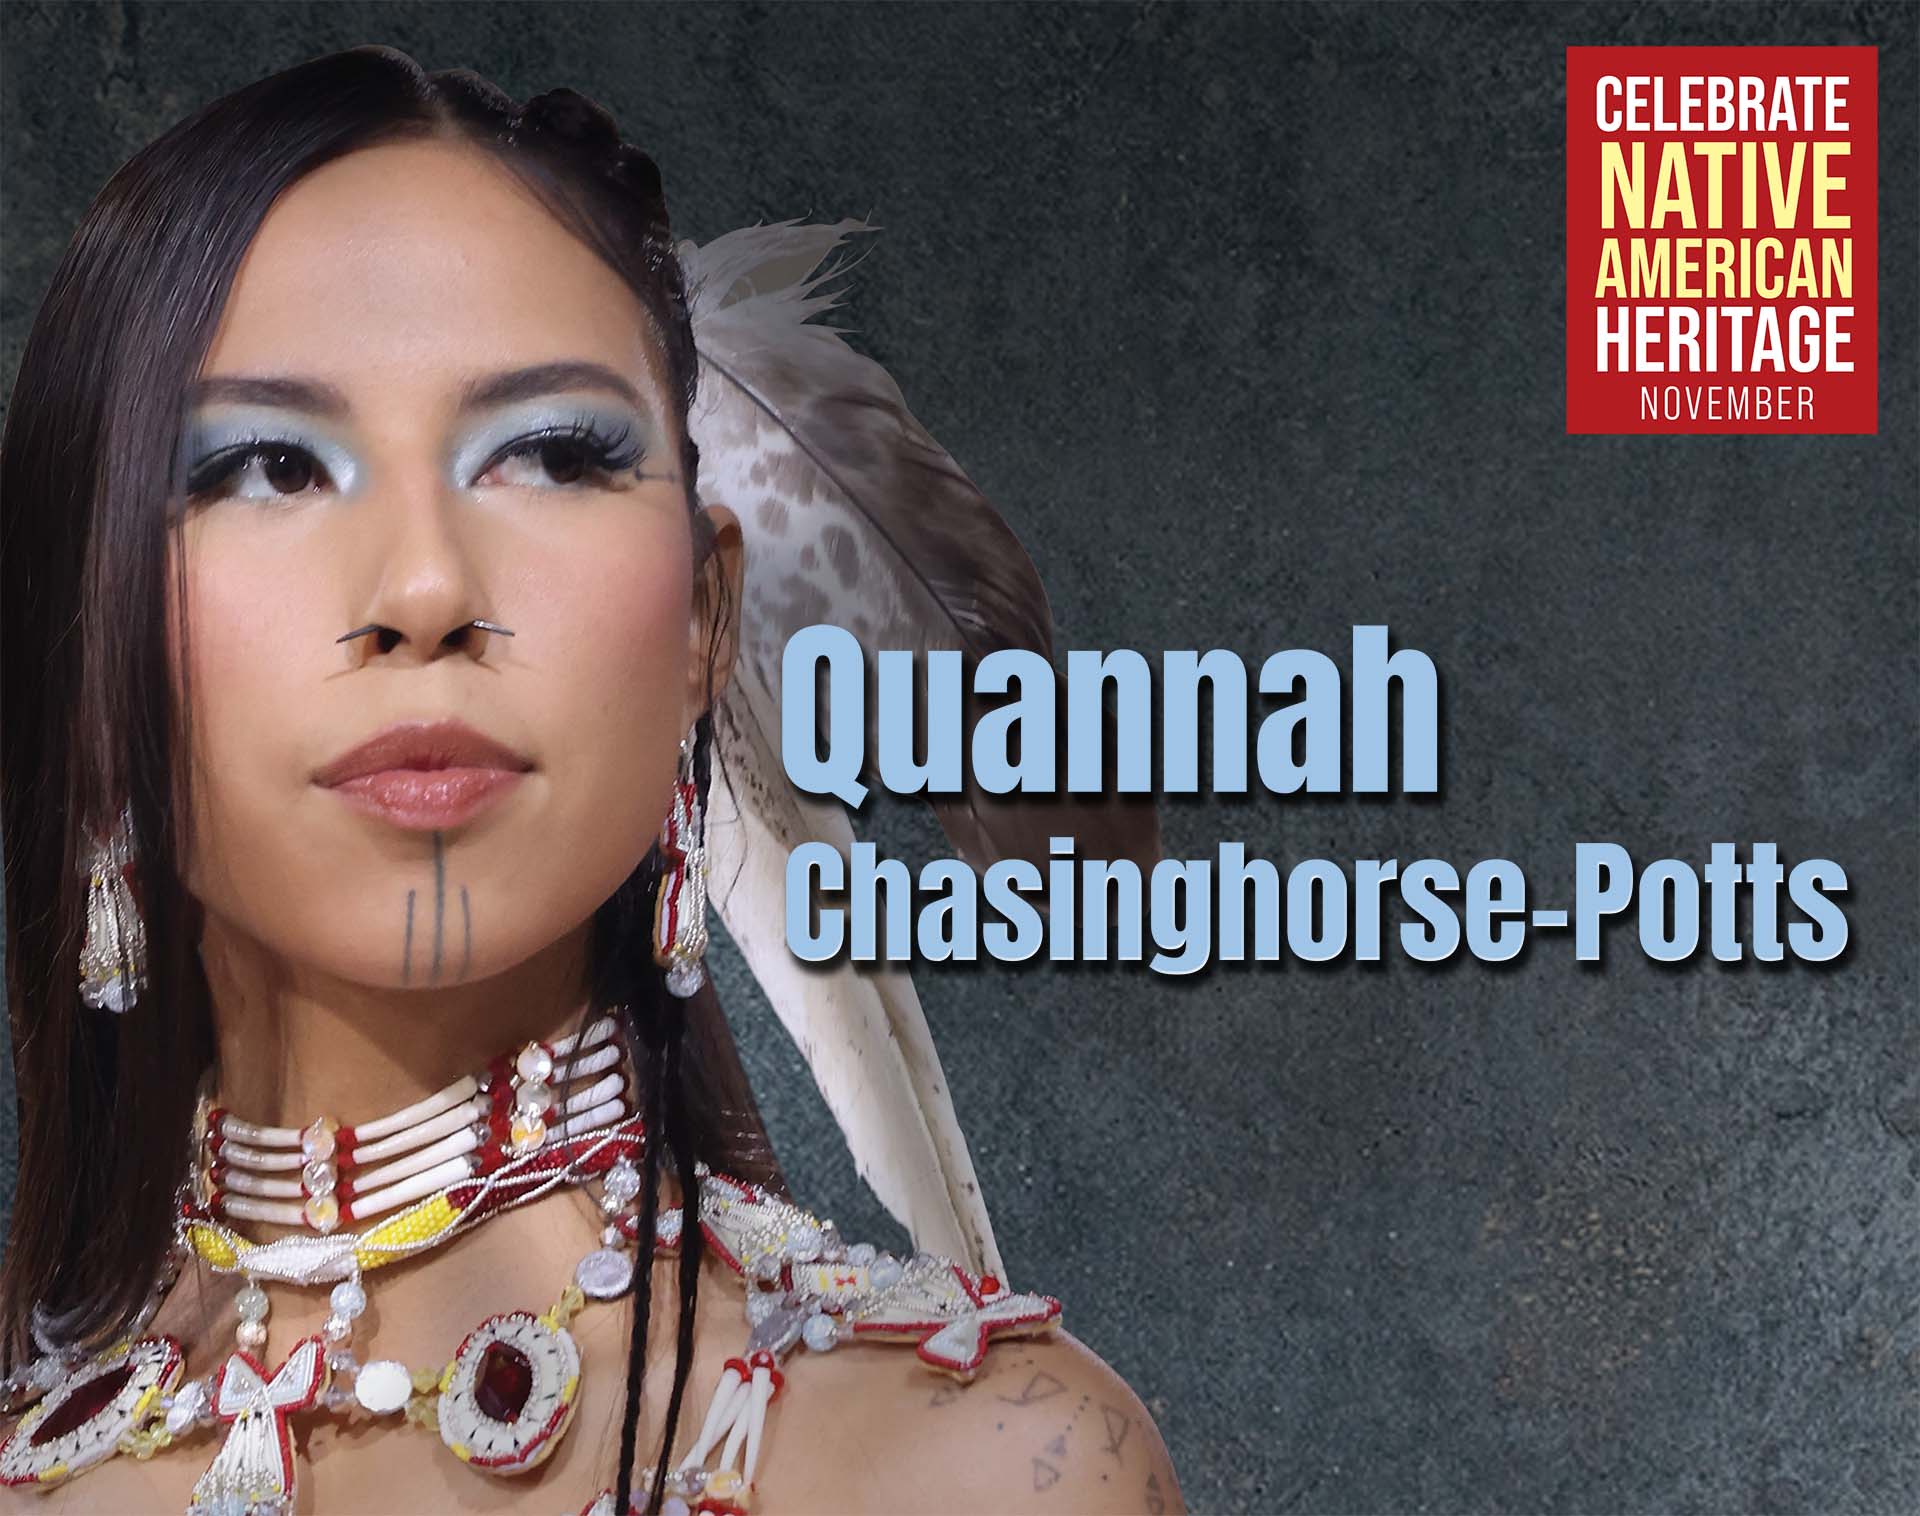 New Poster Celebrates Native American Heritage Month